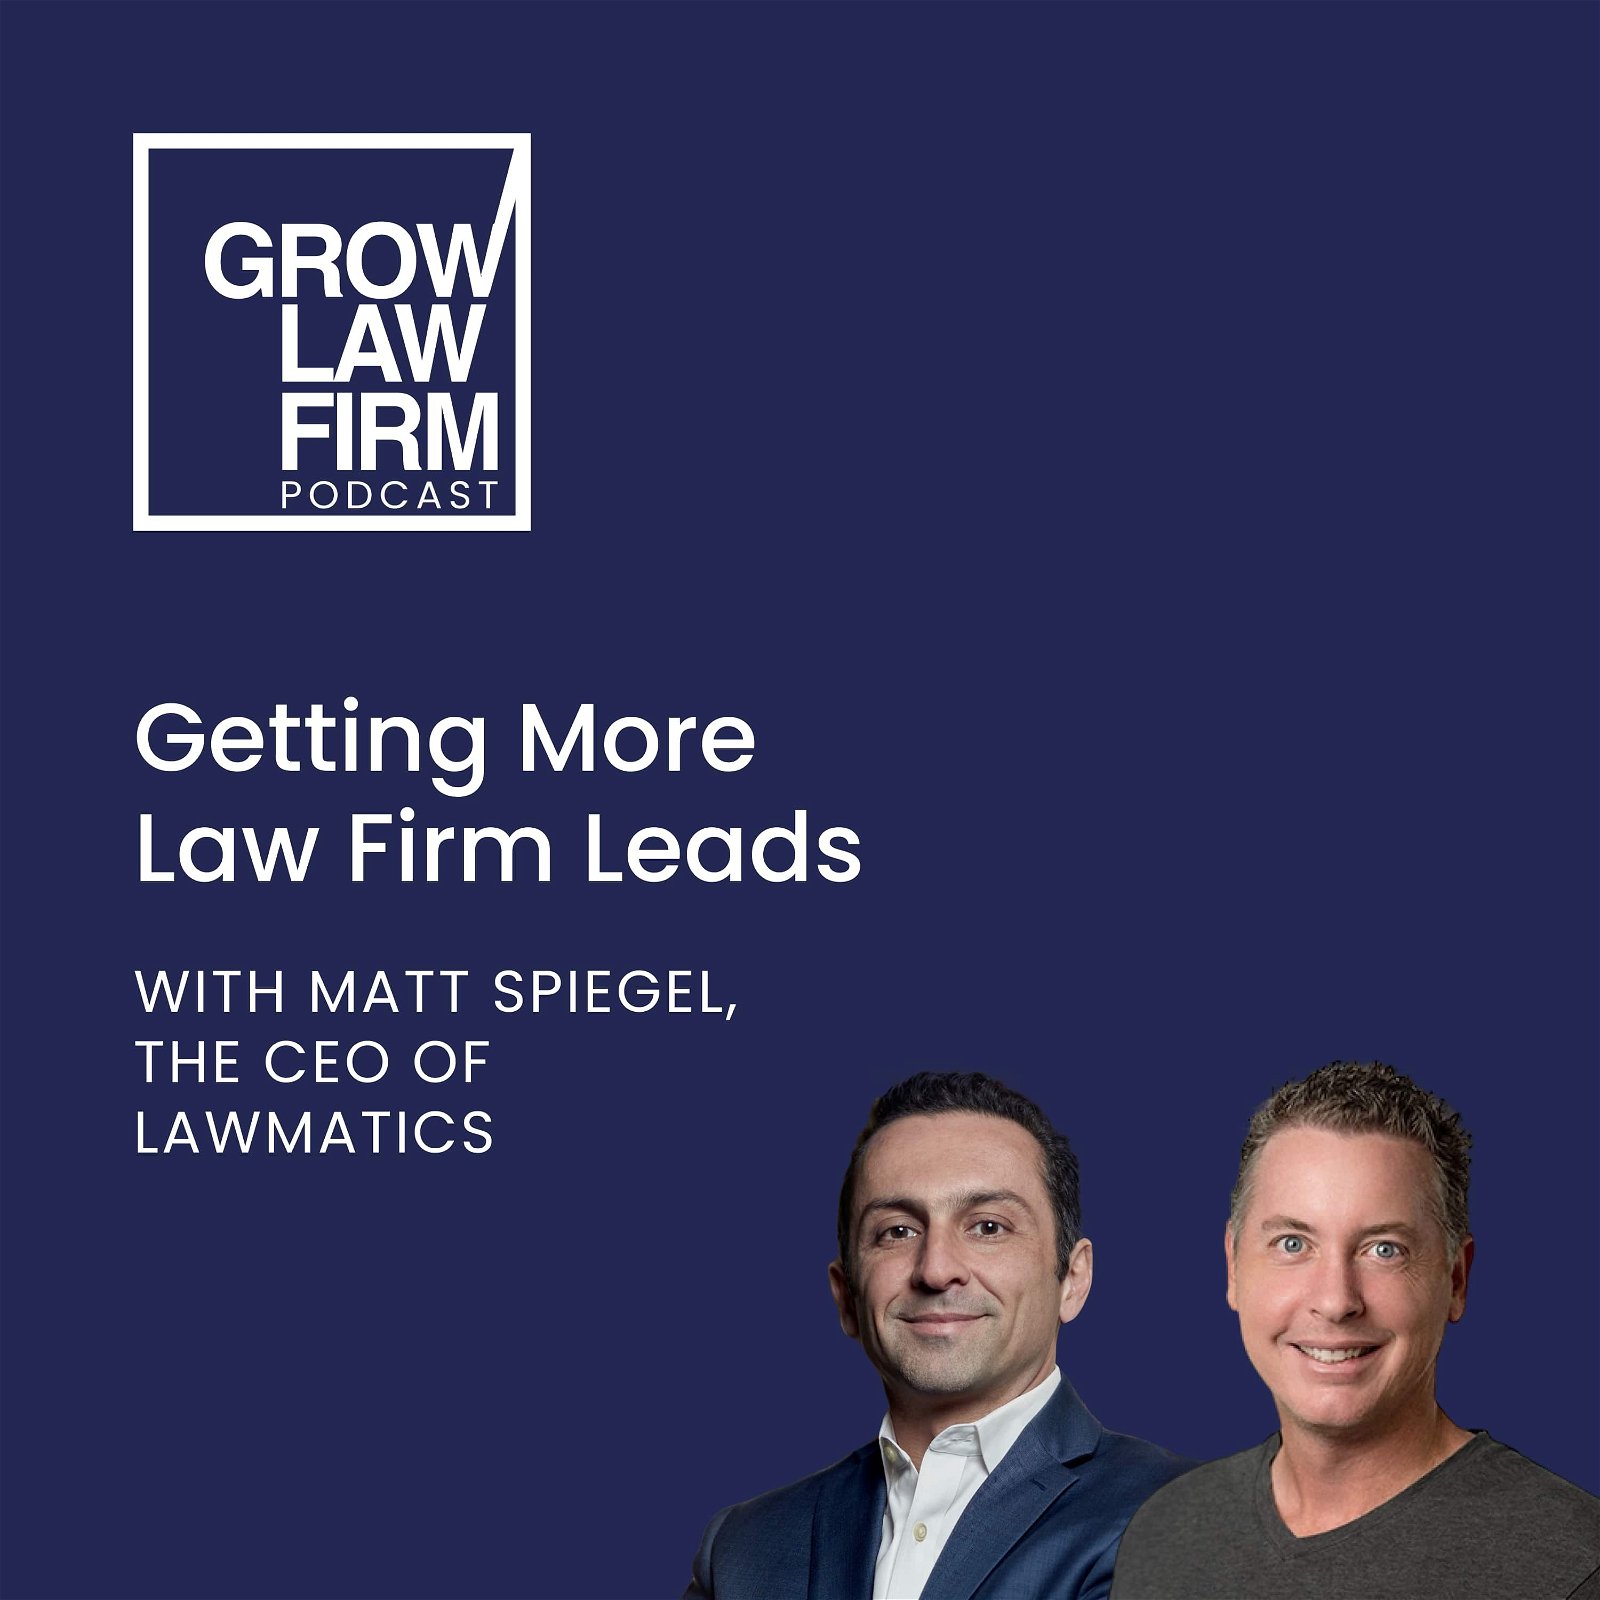 Getting More Law Firm Leads with Matt Spiegel, the CEO of Lawmatics